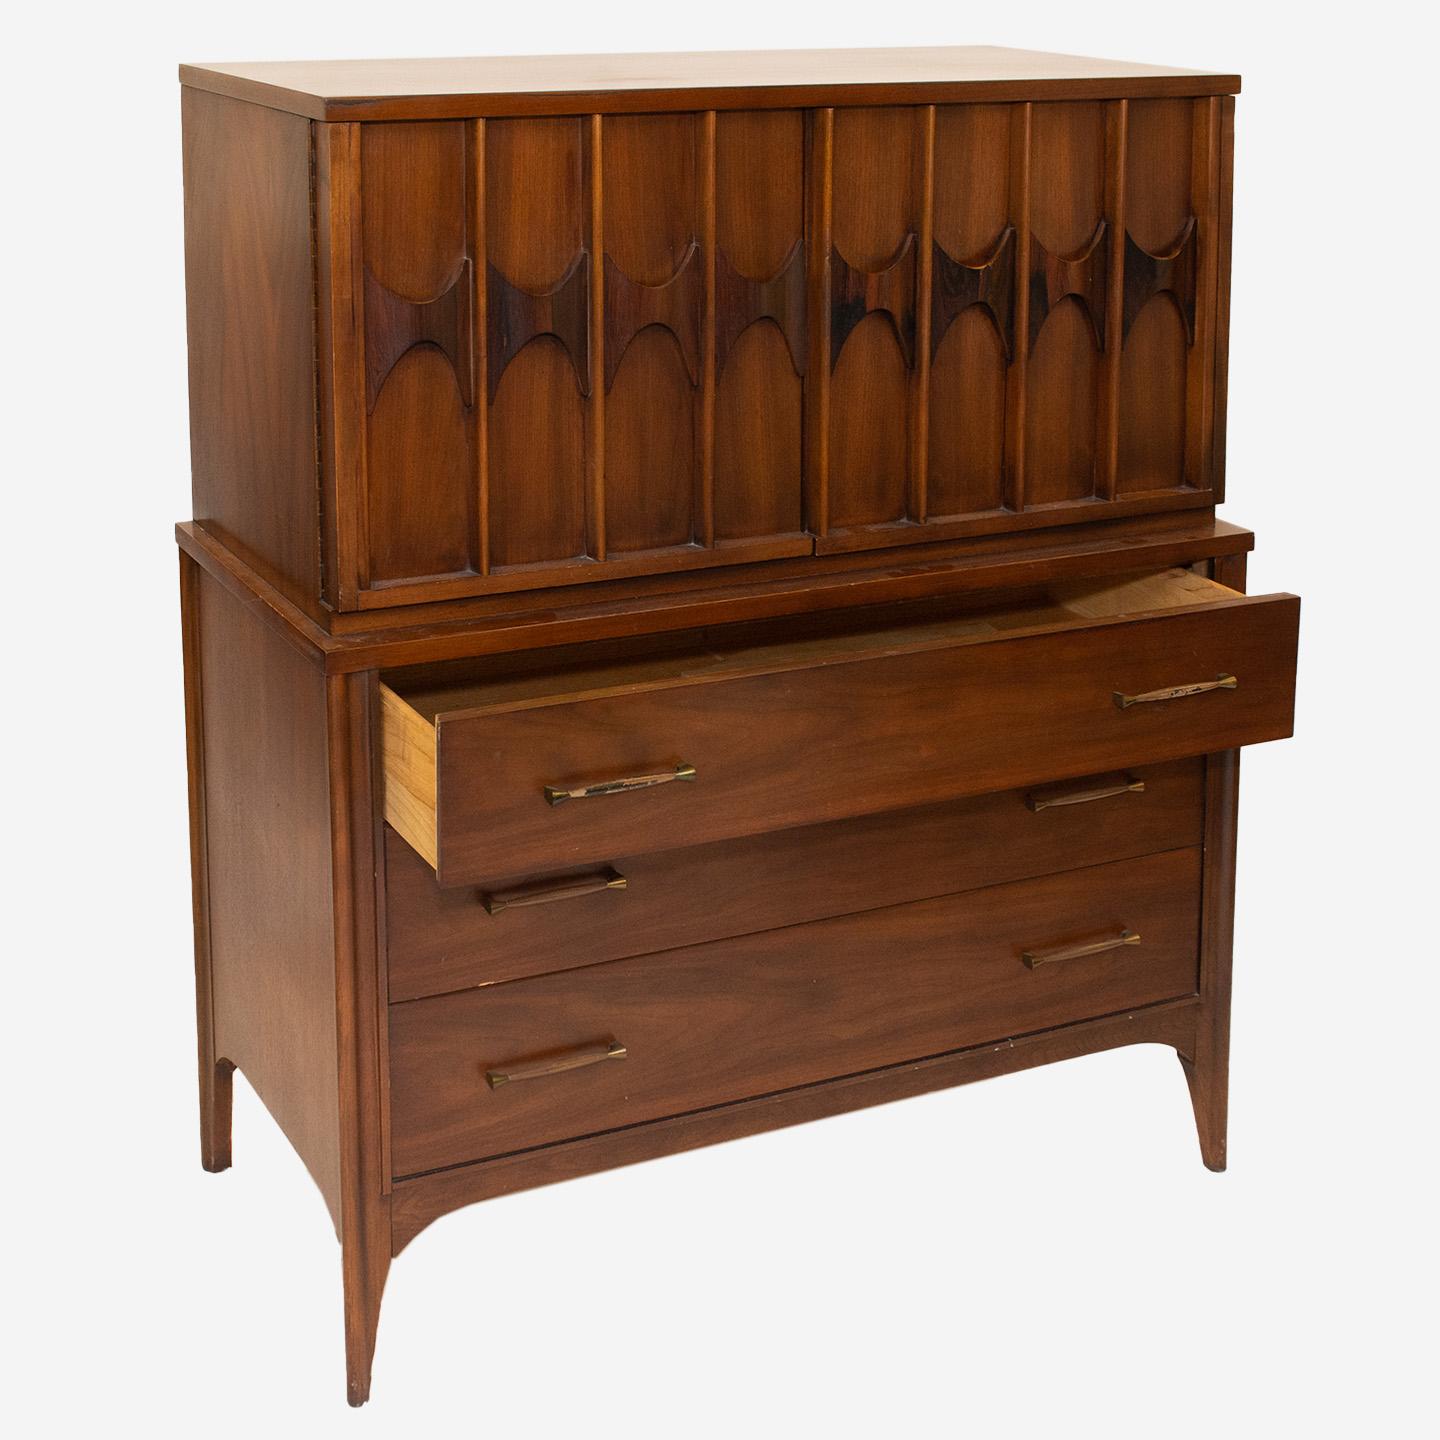 Offering a sweet piece of nostalgia with this iconic Kent Coffey Perspecta midcentury Armoire/Highboy. Started in 1907 in North Carolina, the Kent Coffey company rose in popularity in the 1950s and 60s. Furniture pieces like this dresser became very